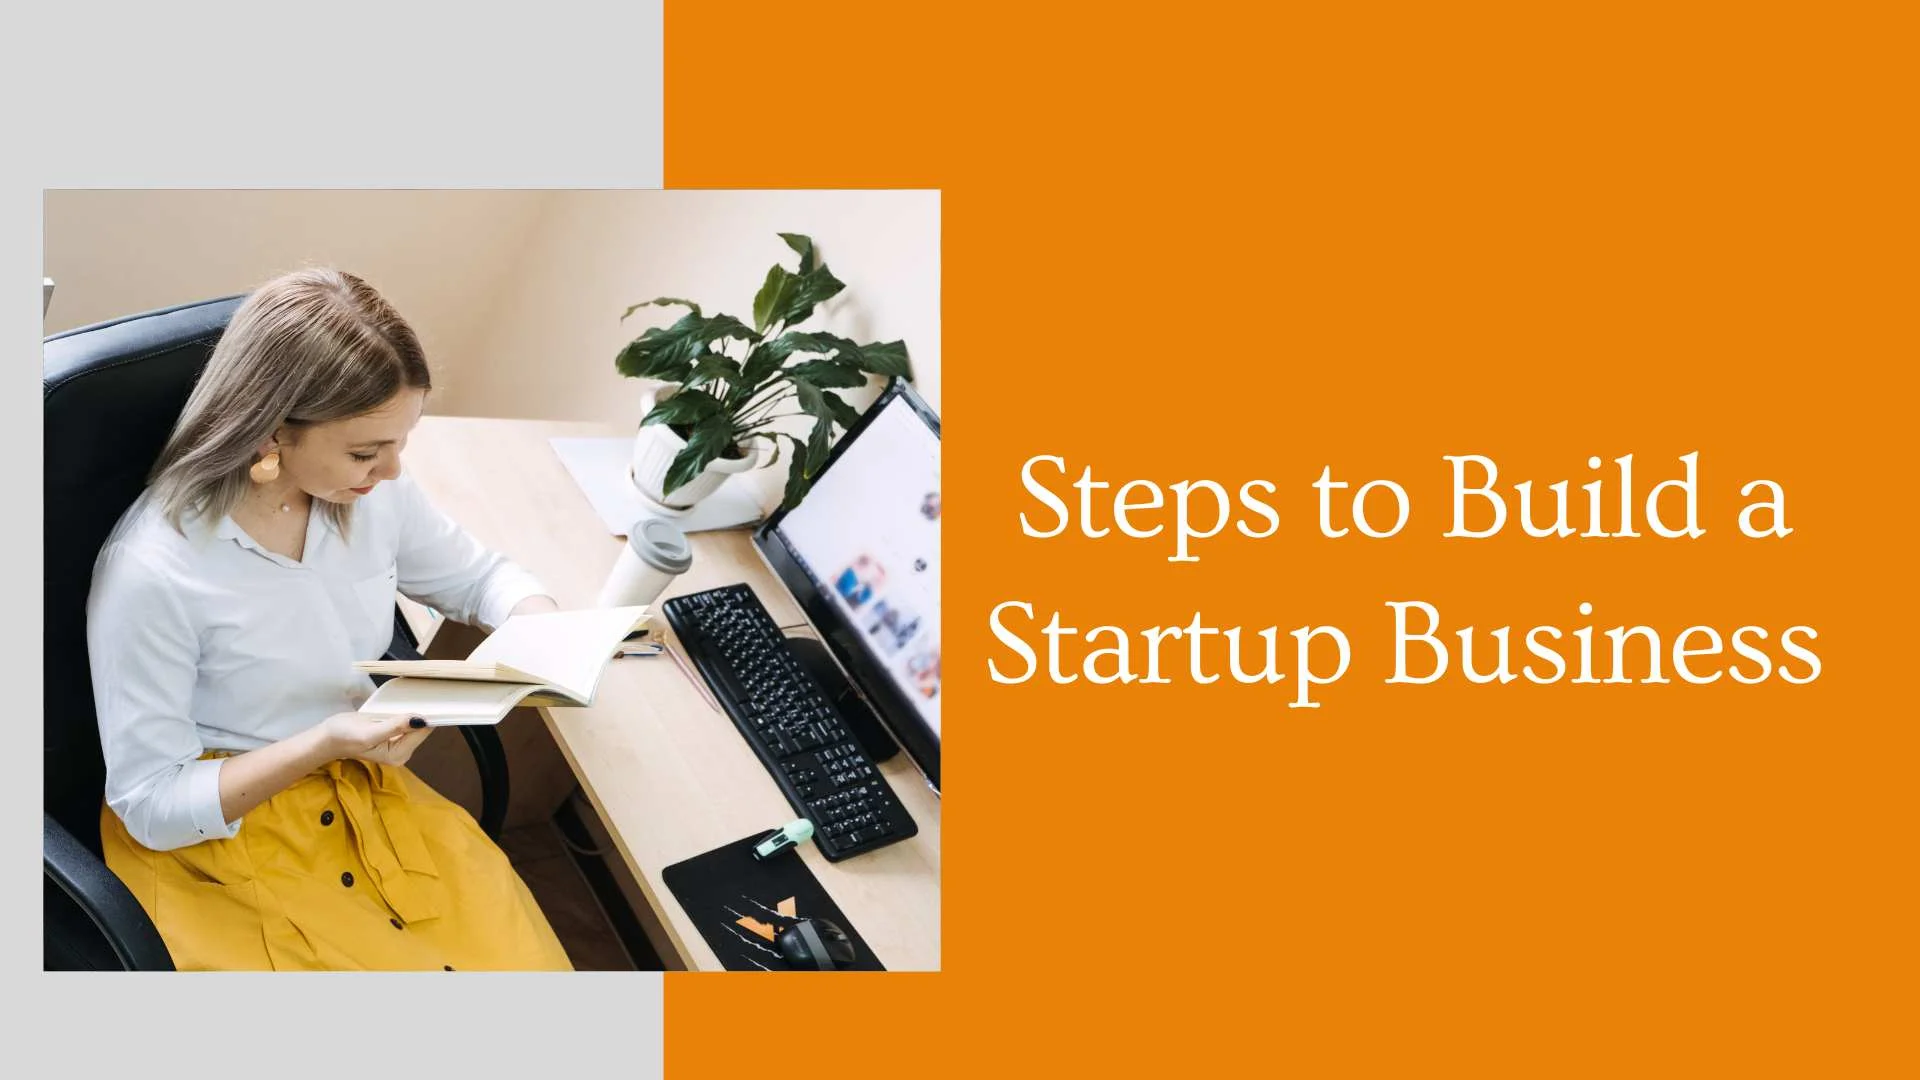 Steps to Build a Startup Business